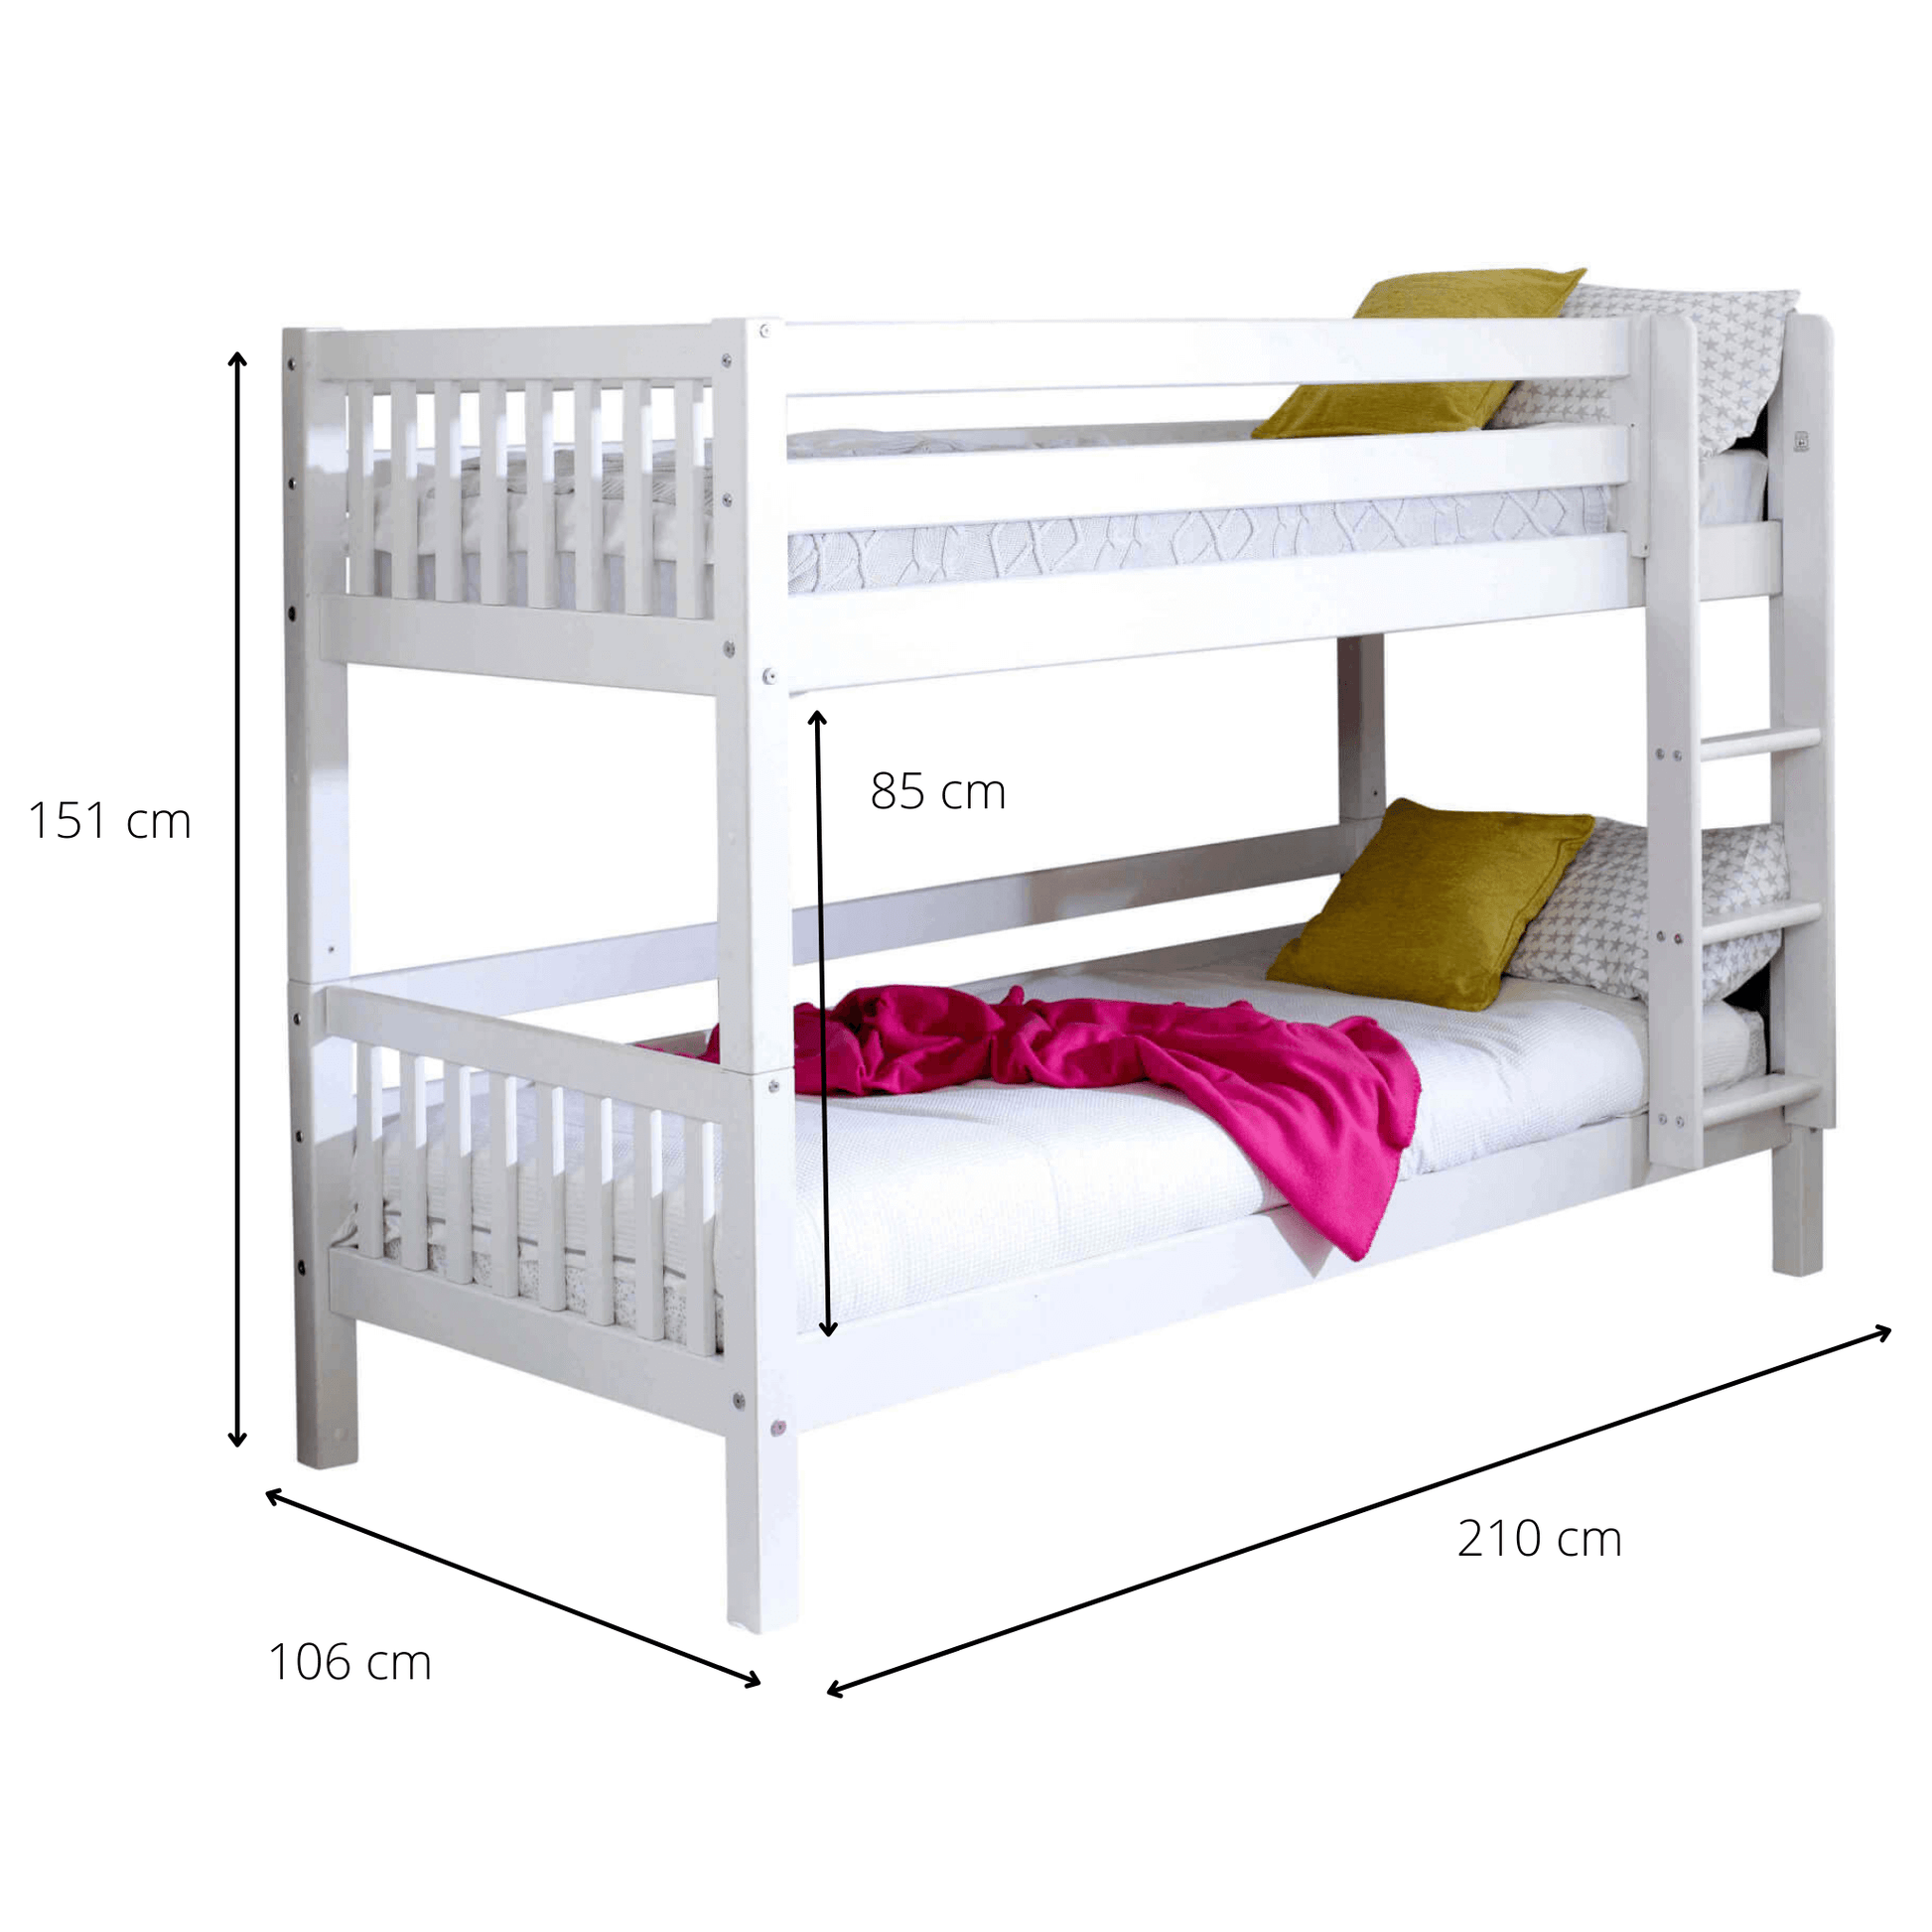 Bunk Bed Frederic Nordic Dimensions